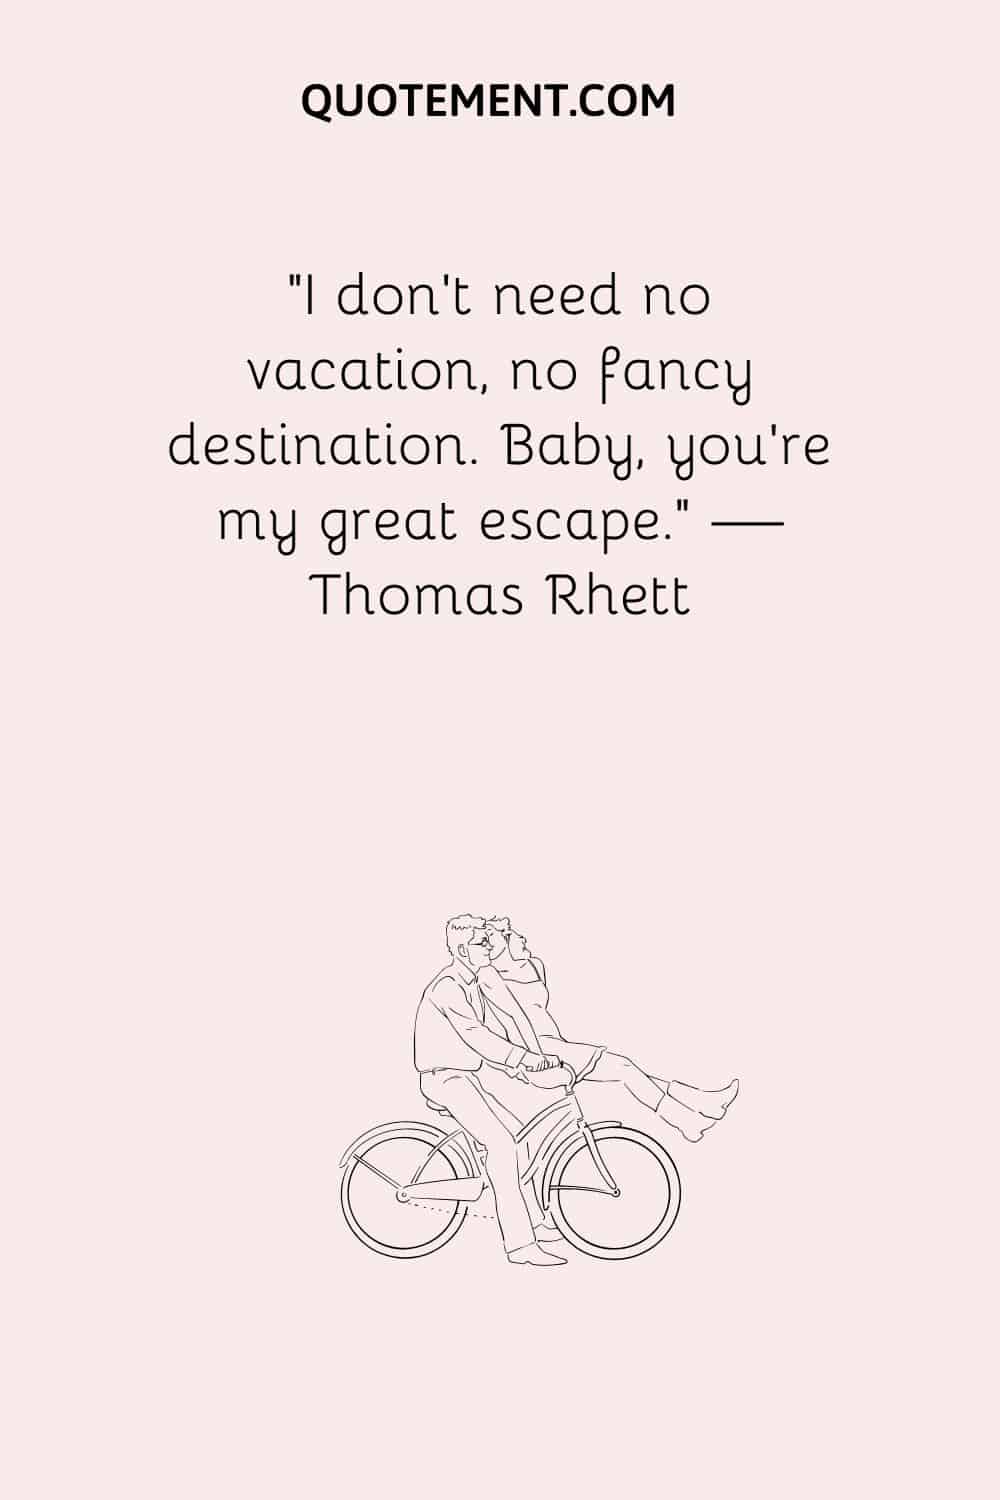 two people on a bicycle illustration representing date night quote